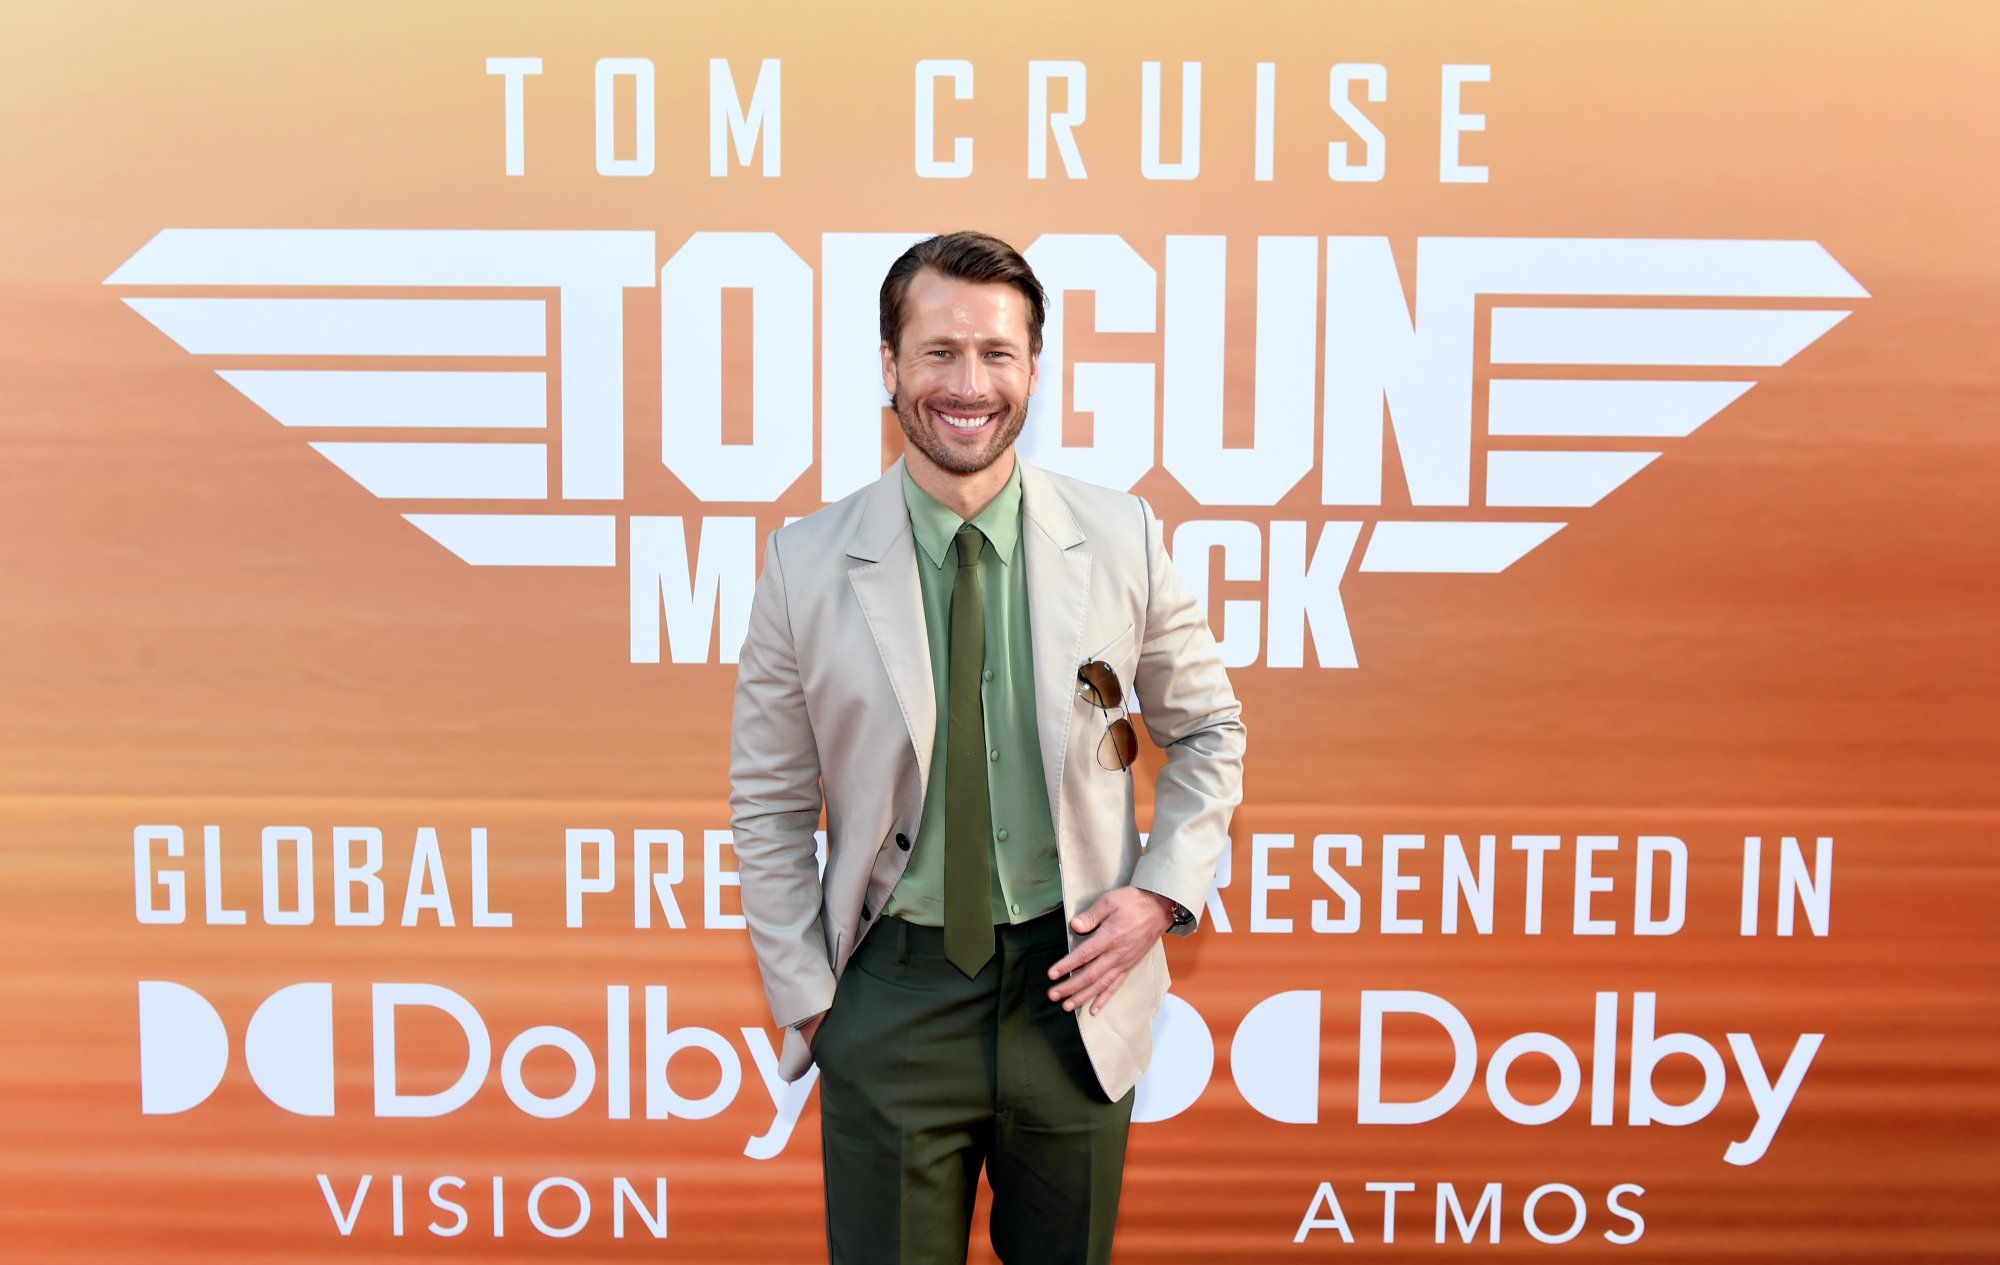 'Top Gun: Maverick' actor Glen Powell wearing a suit and smiling in front of the movie step and repeat